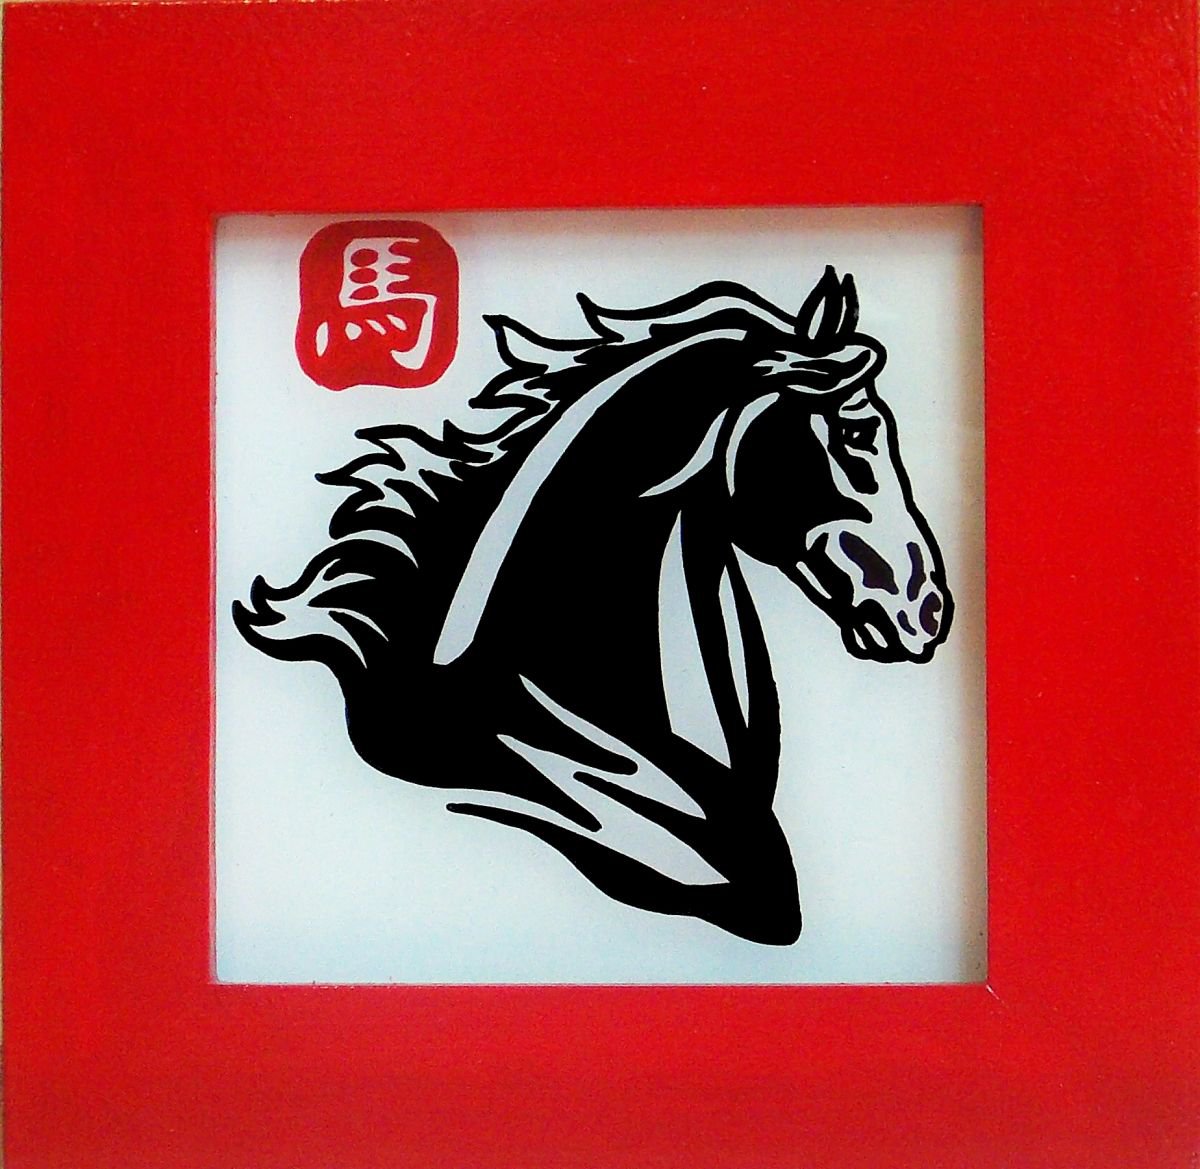 Year of the Horse 2014 by Adriana Vasile